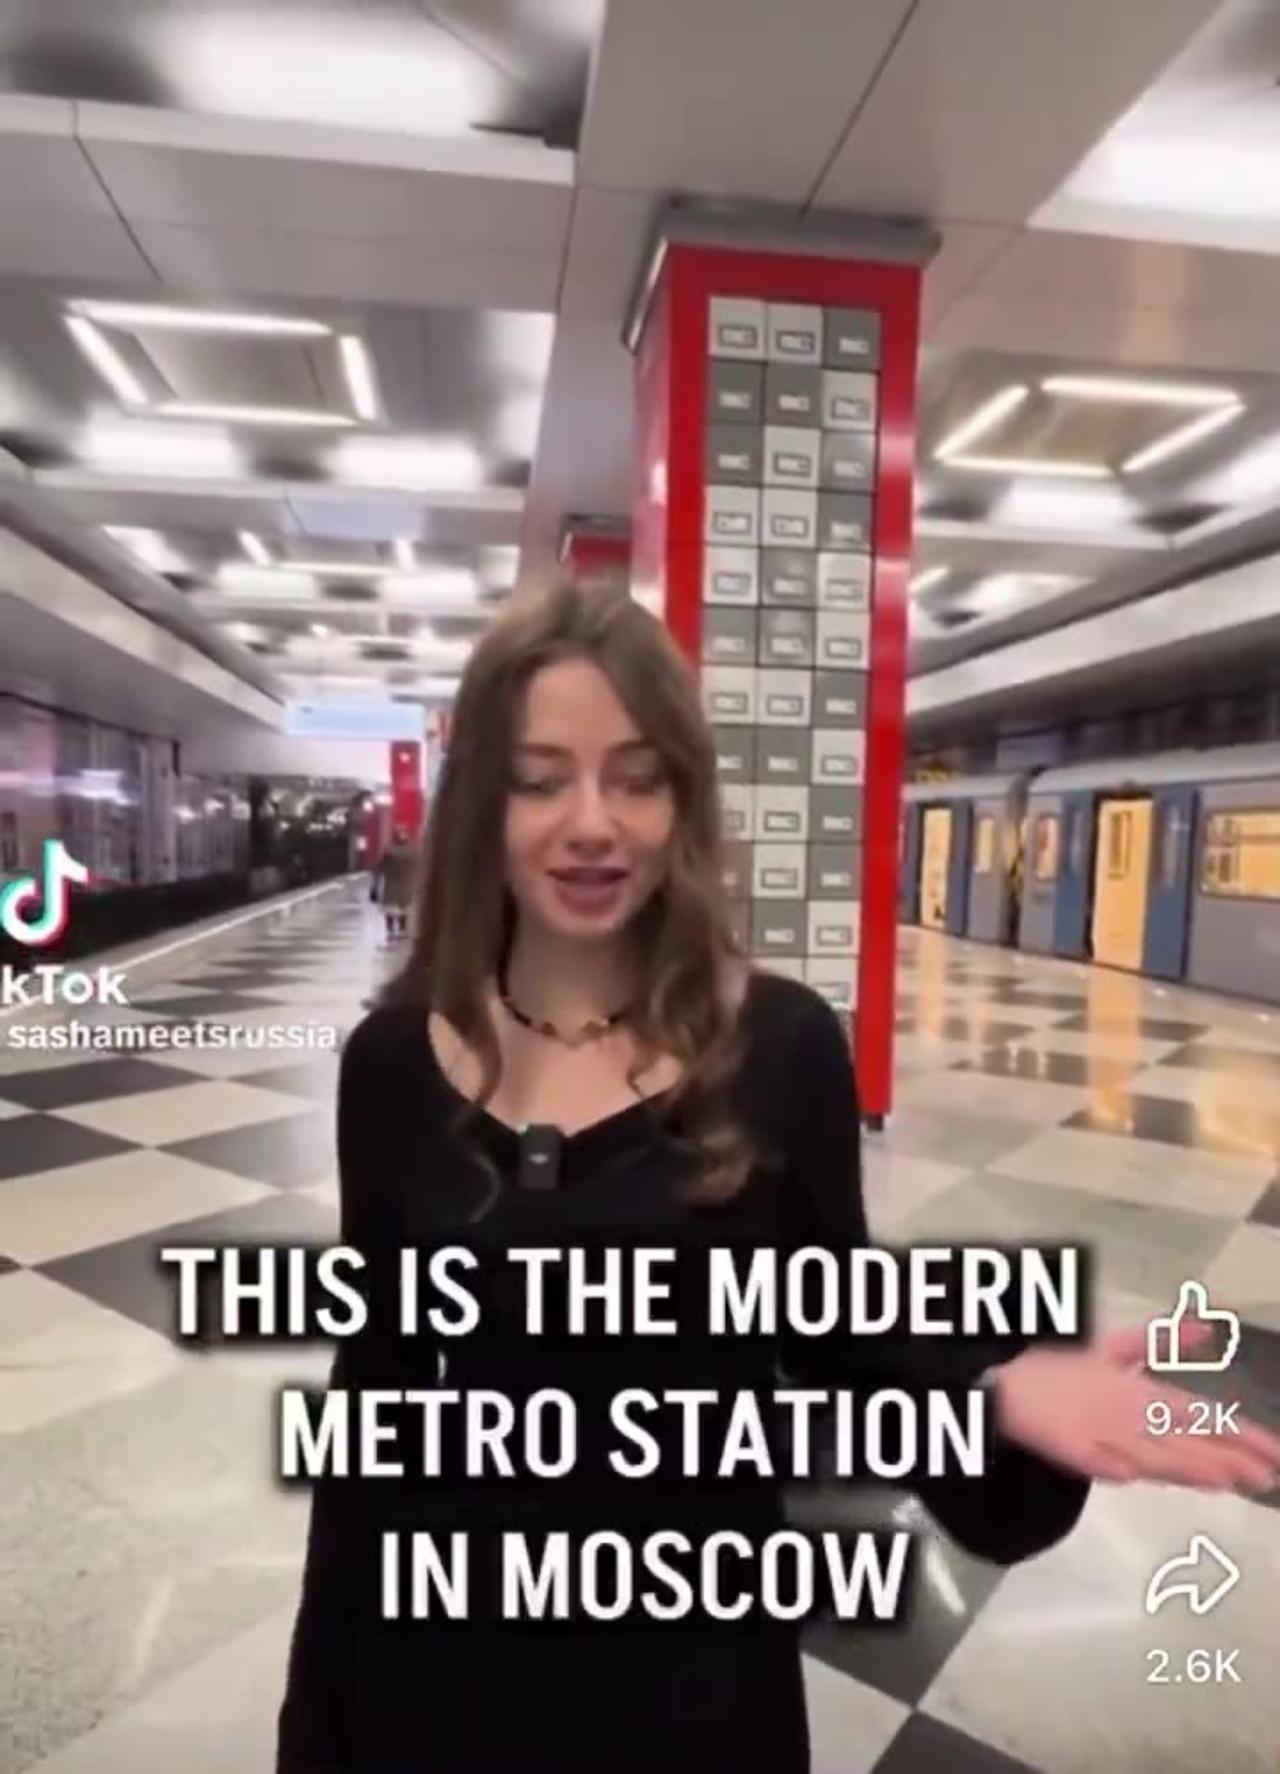 The new modern Metro-Station in Moscow